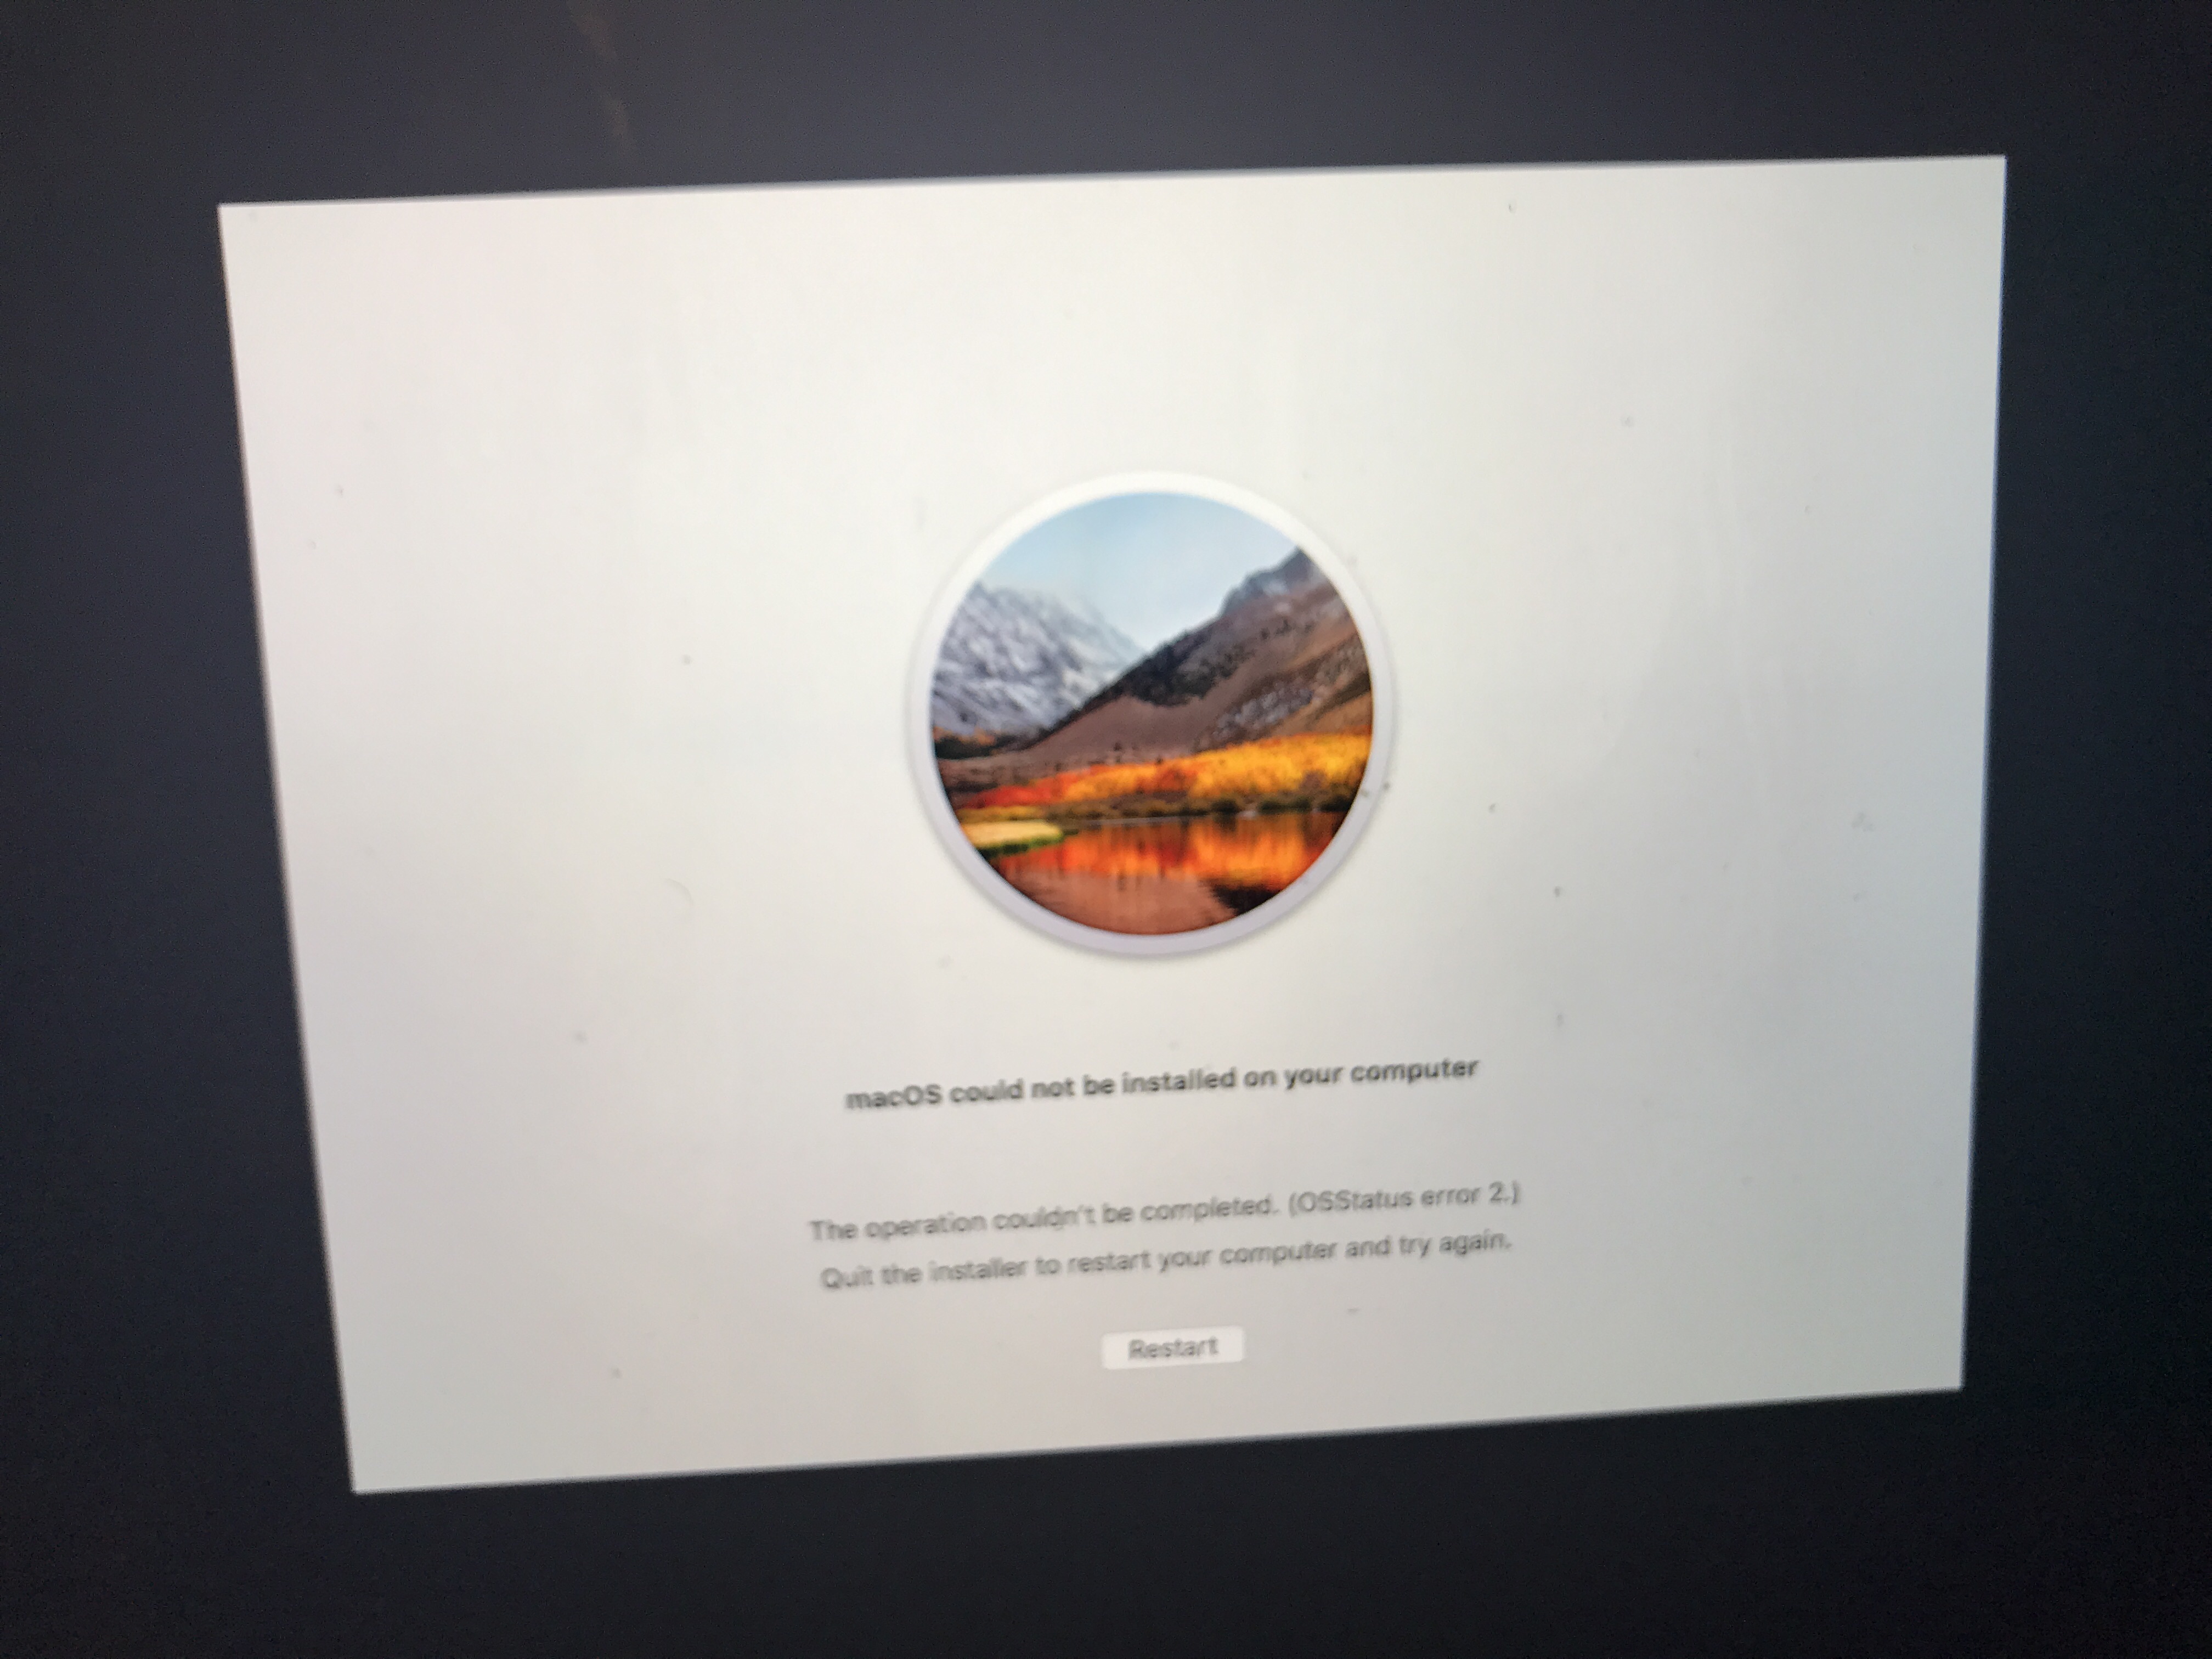 Kejser nedenunder pie macOS could not be installed on your computer” (OSStatus error 2) |  MacRumors Forums